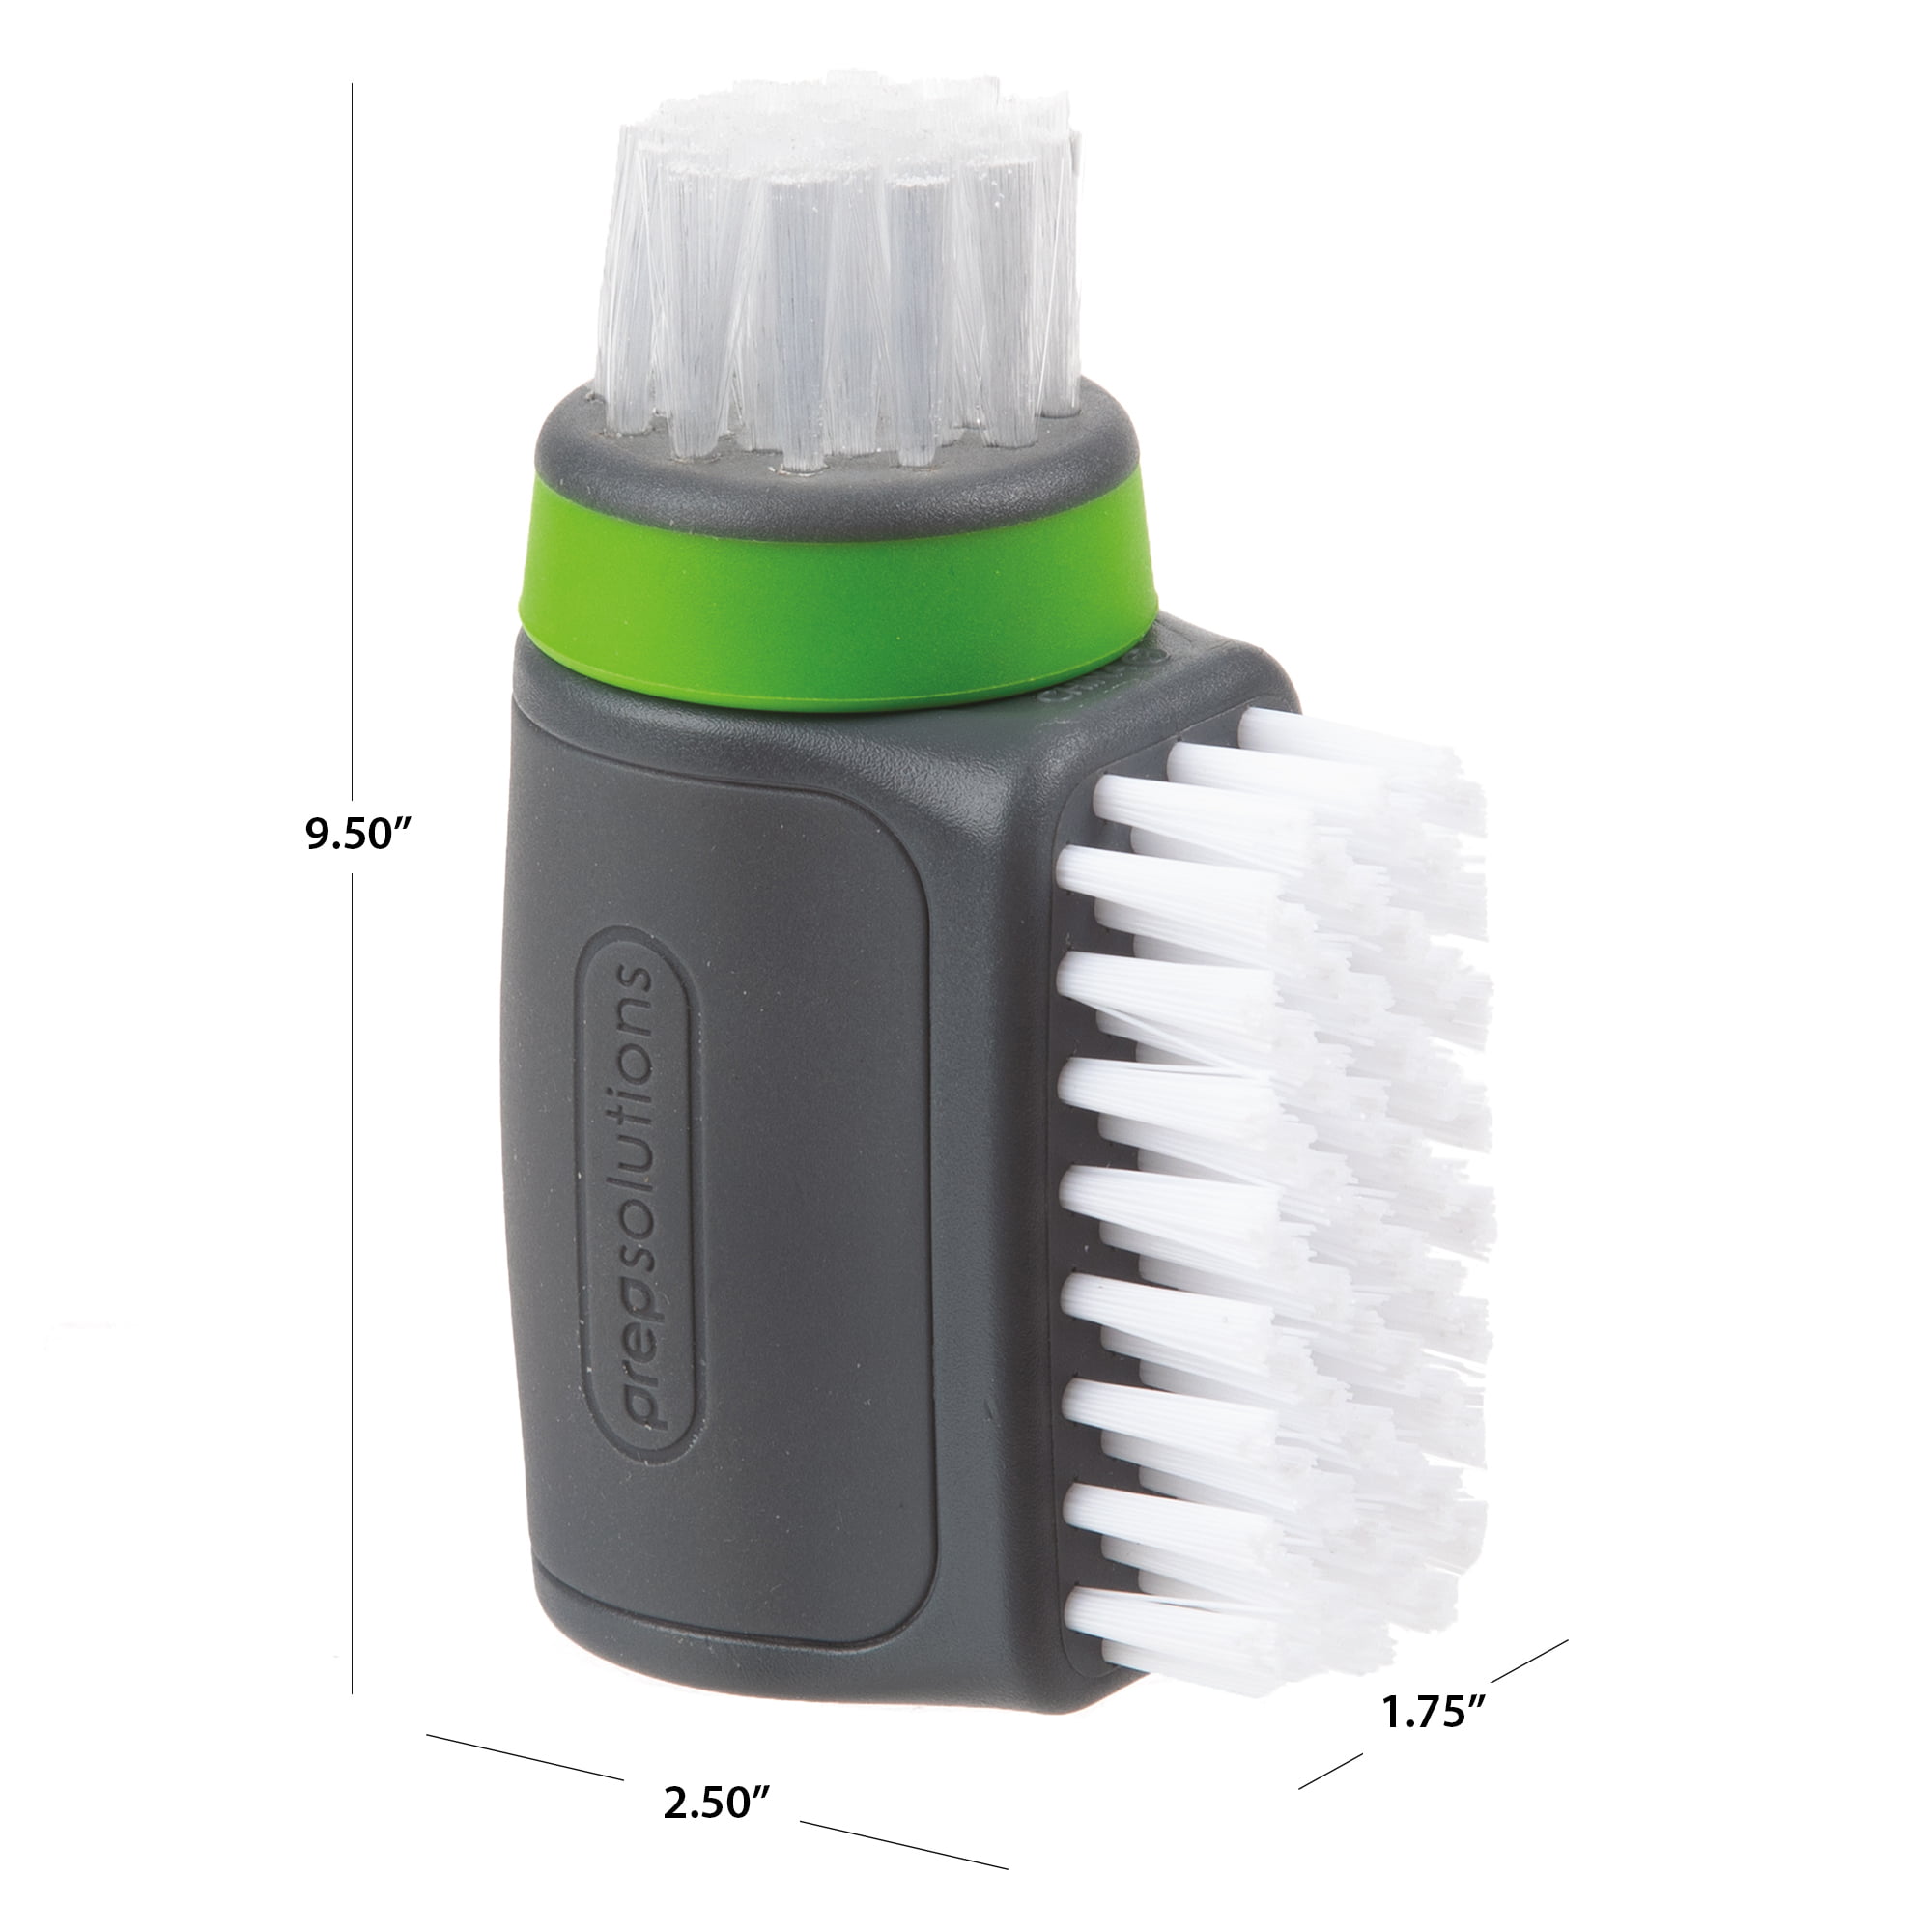 Dropship 1pc Multifunctional Fruit And Vegetable Cleaning Brush